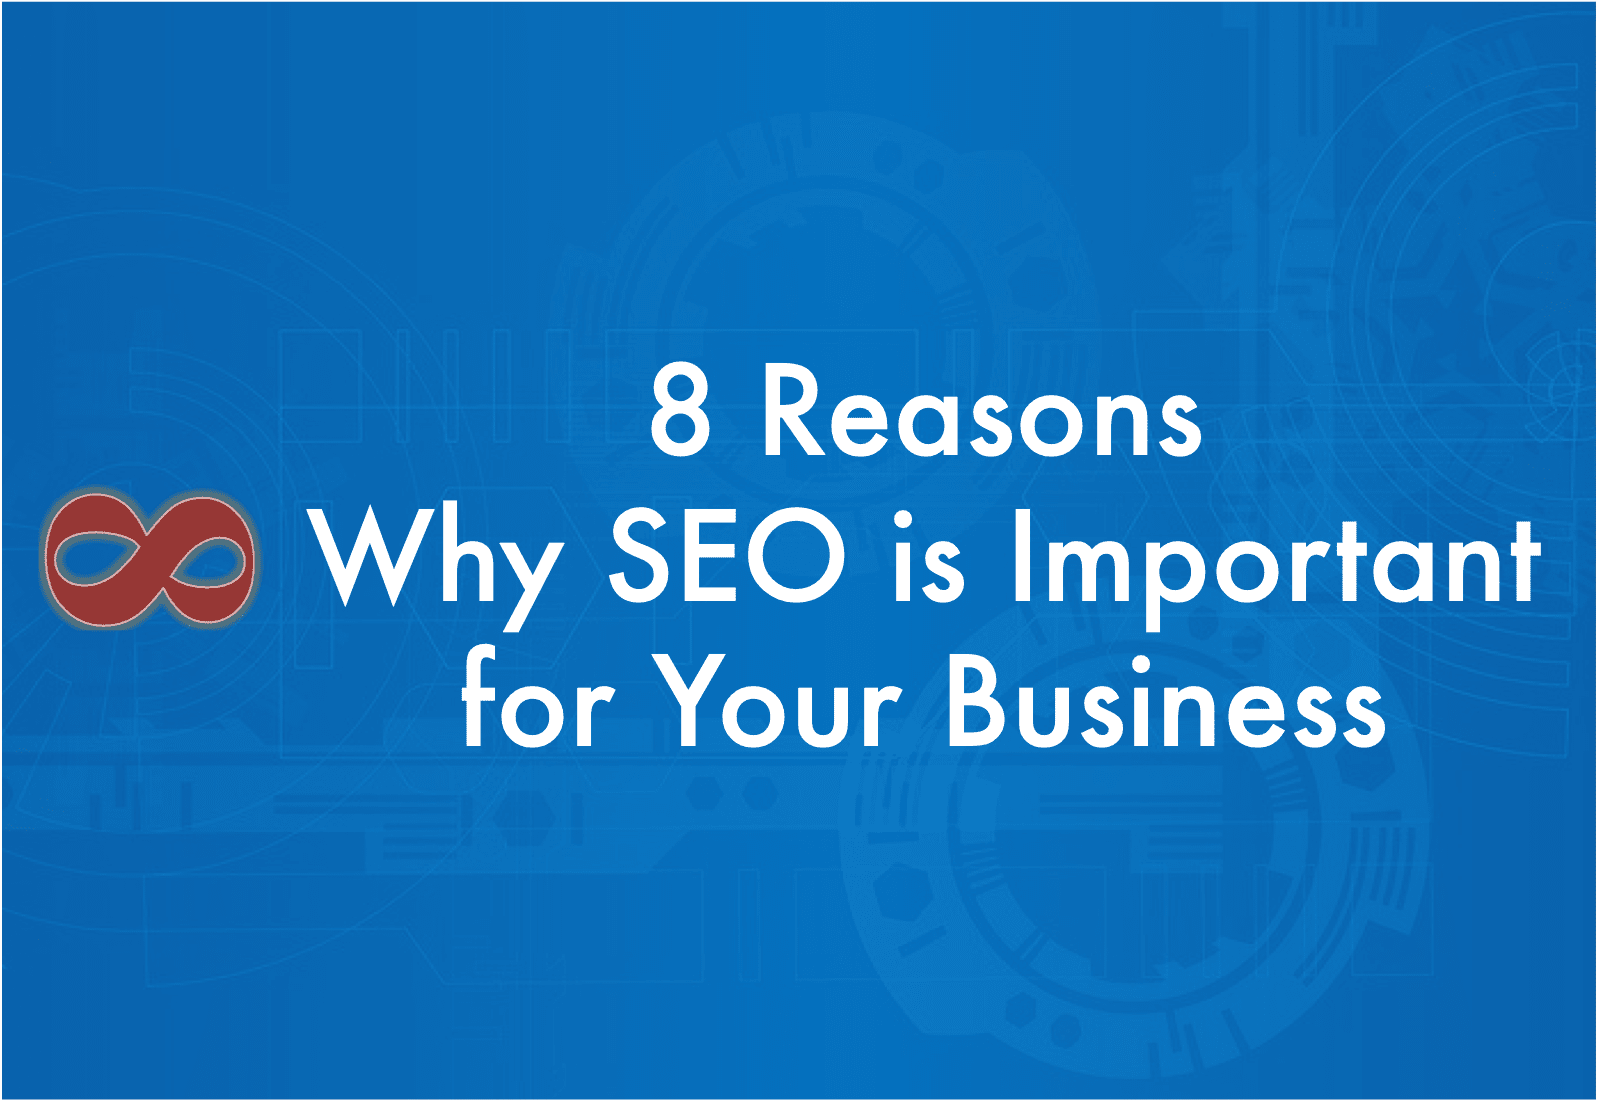 8 Reasons Why SEO is Important for Your Business Article Header Image